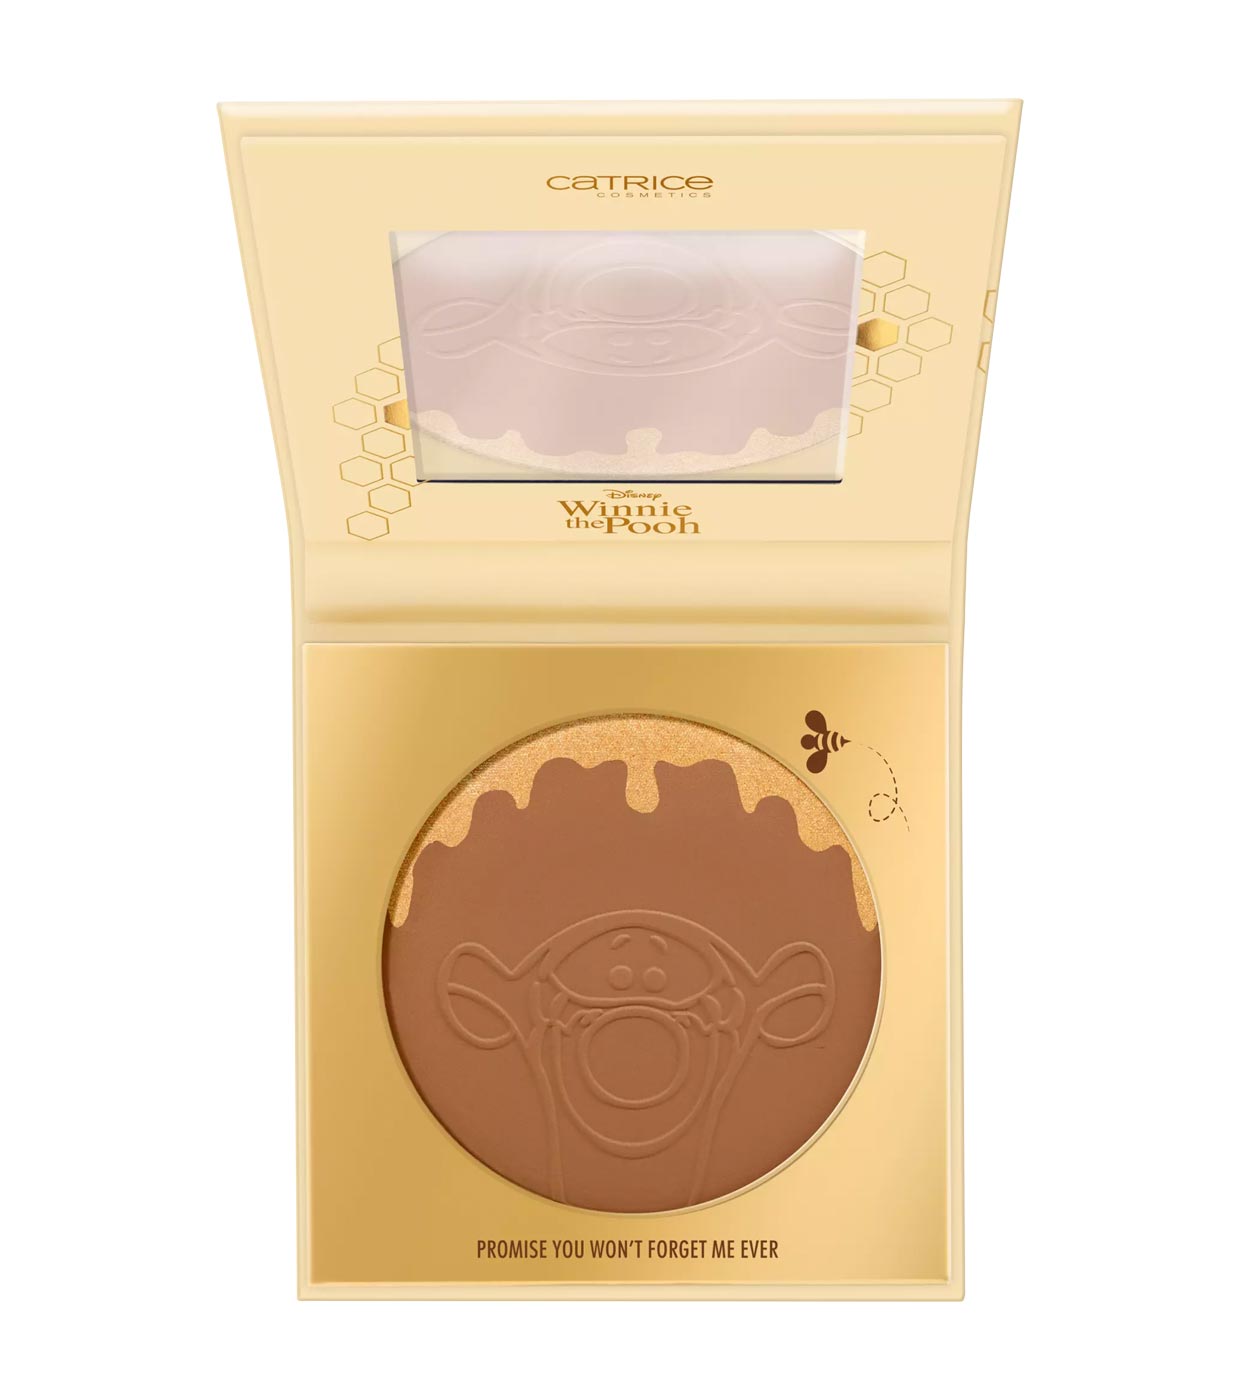 Buy Catrice - *Winnie Won\'t 020: Powder Pooh* - | Promise the You Subtle Ever Forget Maquillalia Shimmer Me - Bronzer